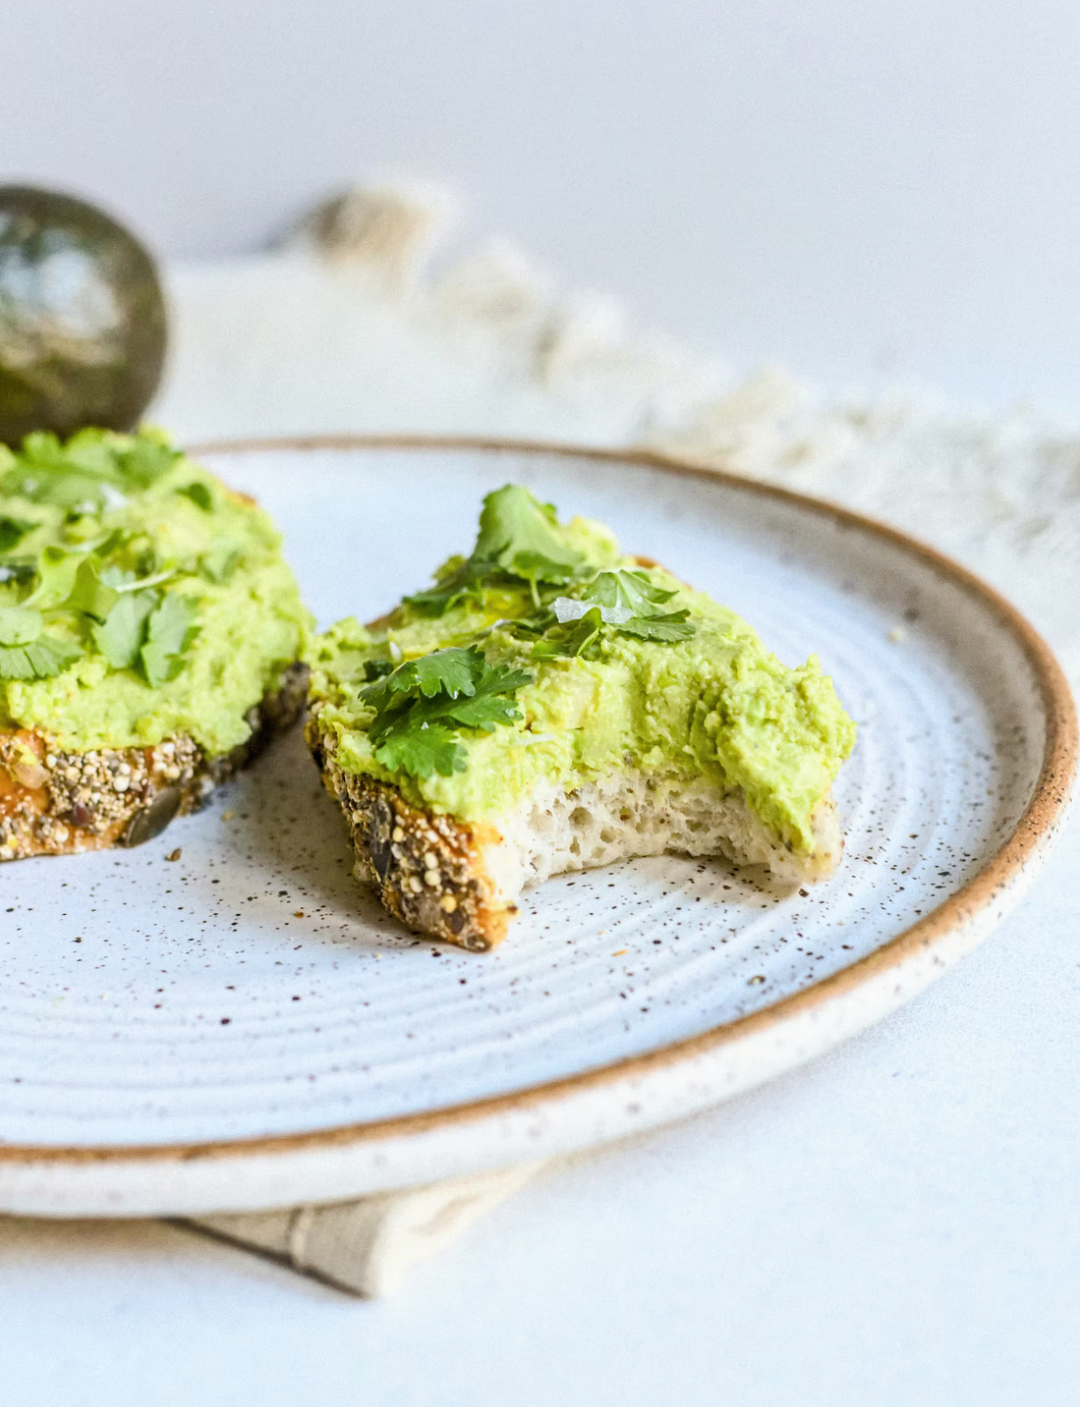 honey avocado breakfast recipes with avocado toast lemon juice chili pepper flakes and garlic toast with french spices